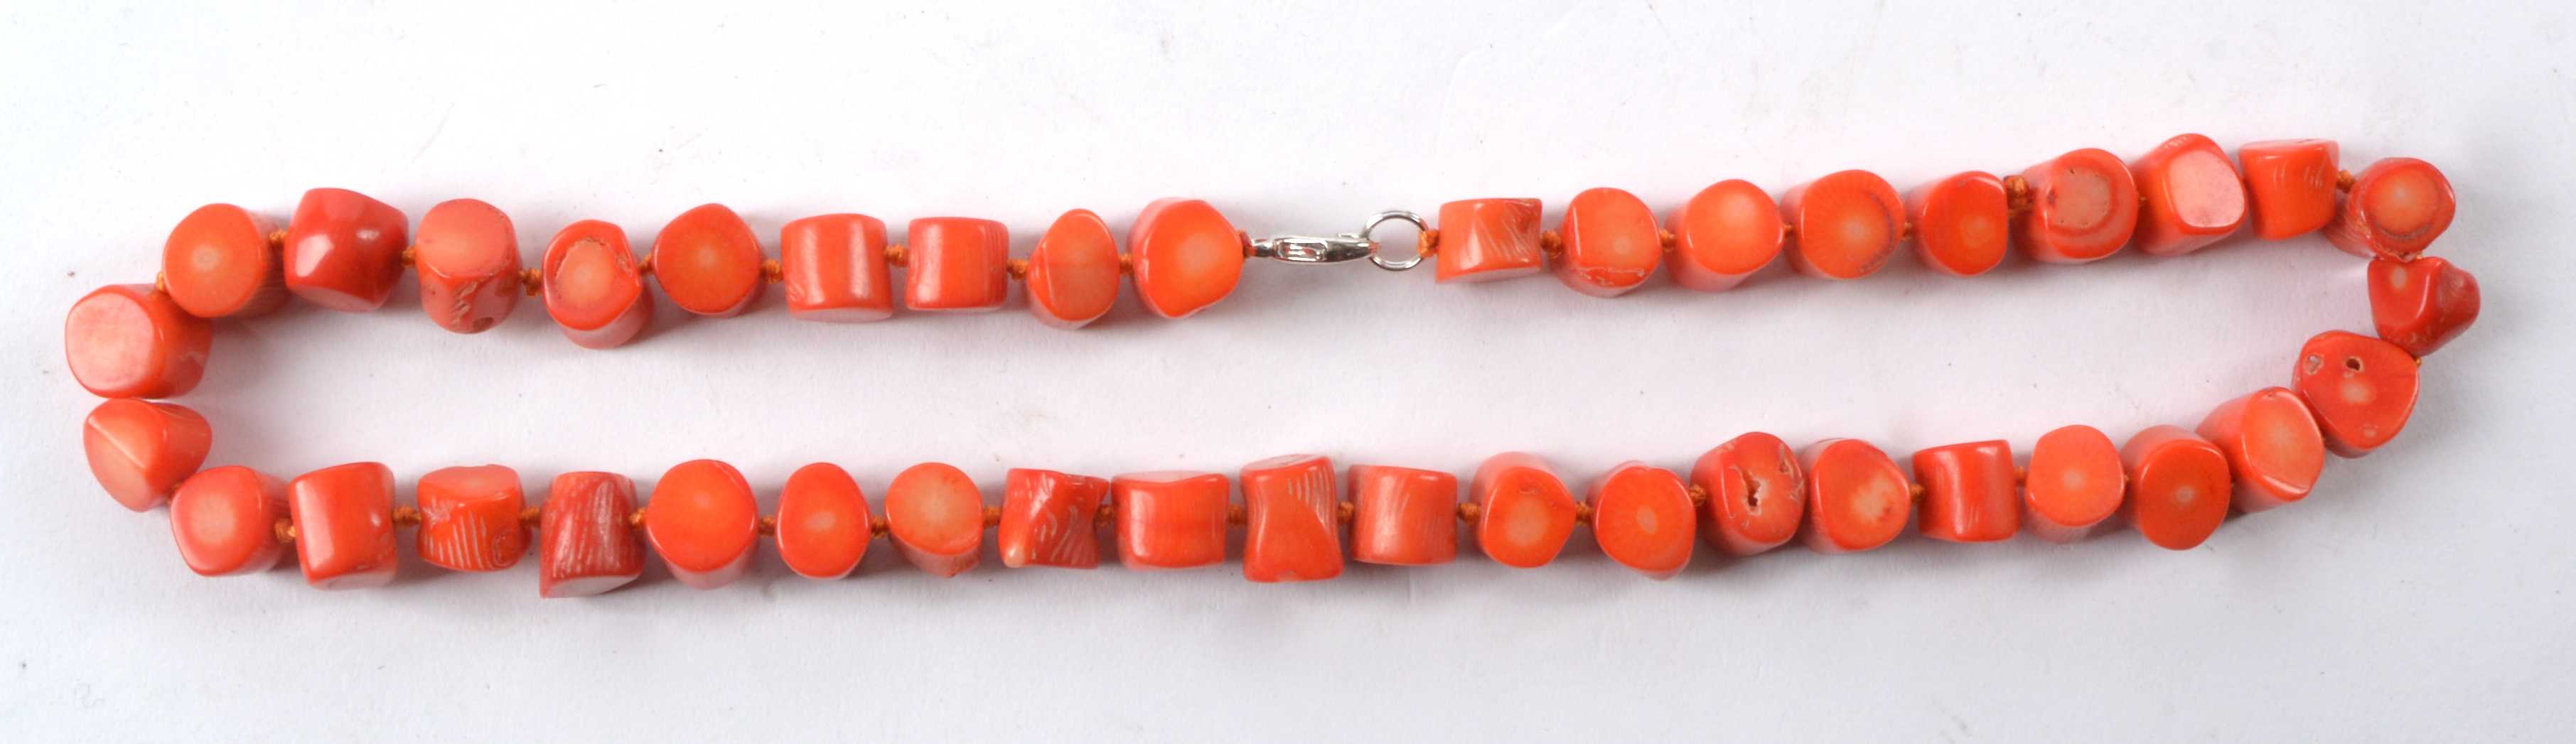 A polished coral necklace with near cylindrical beads, length 24cm - Image 3 of 3